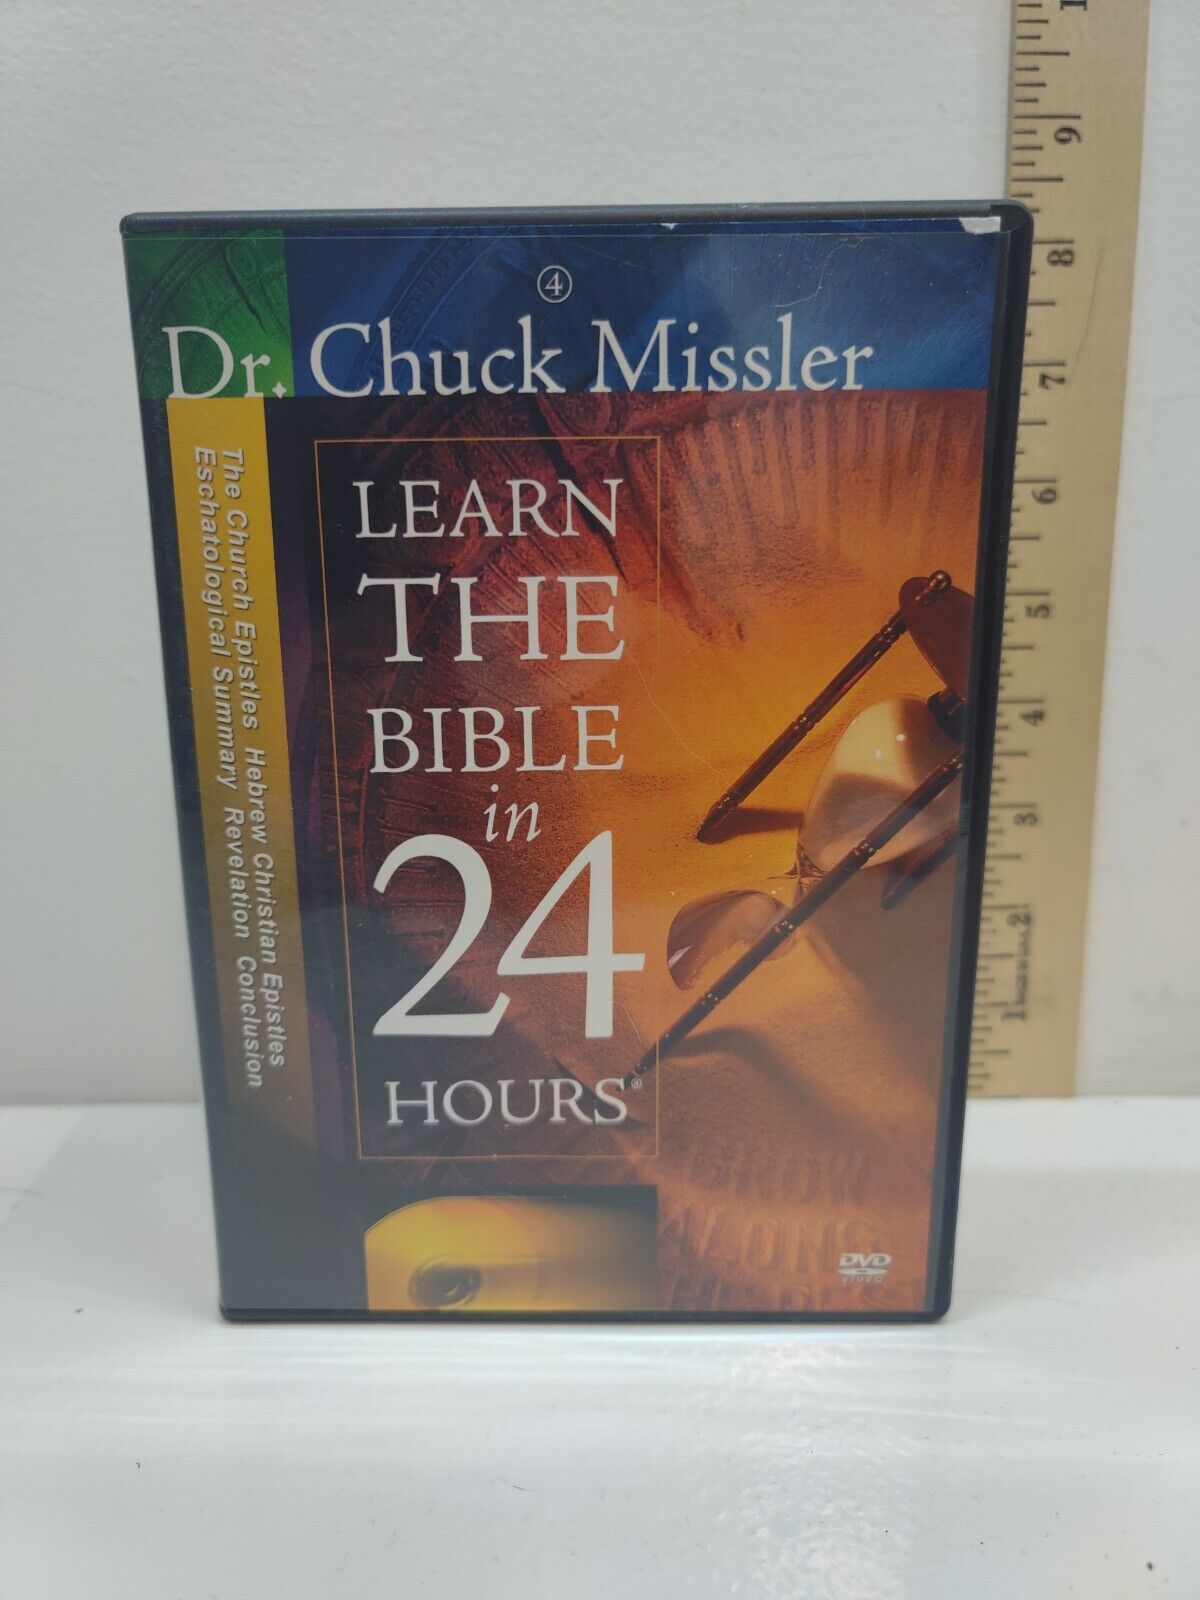 Learn the Bible in 24 Hours by Chuck Missler (2005, DVD, Deluxe) Volume 7 and 8